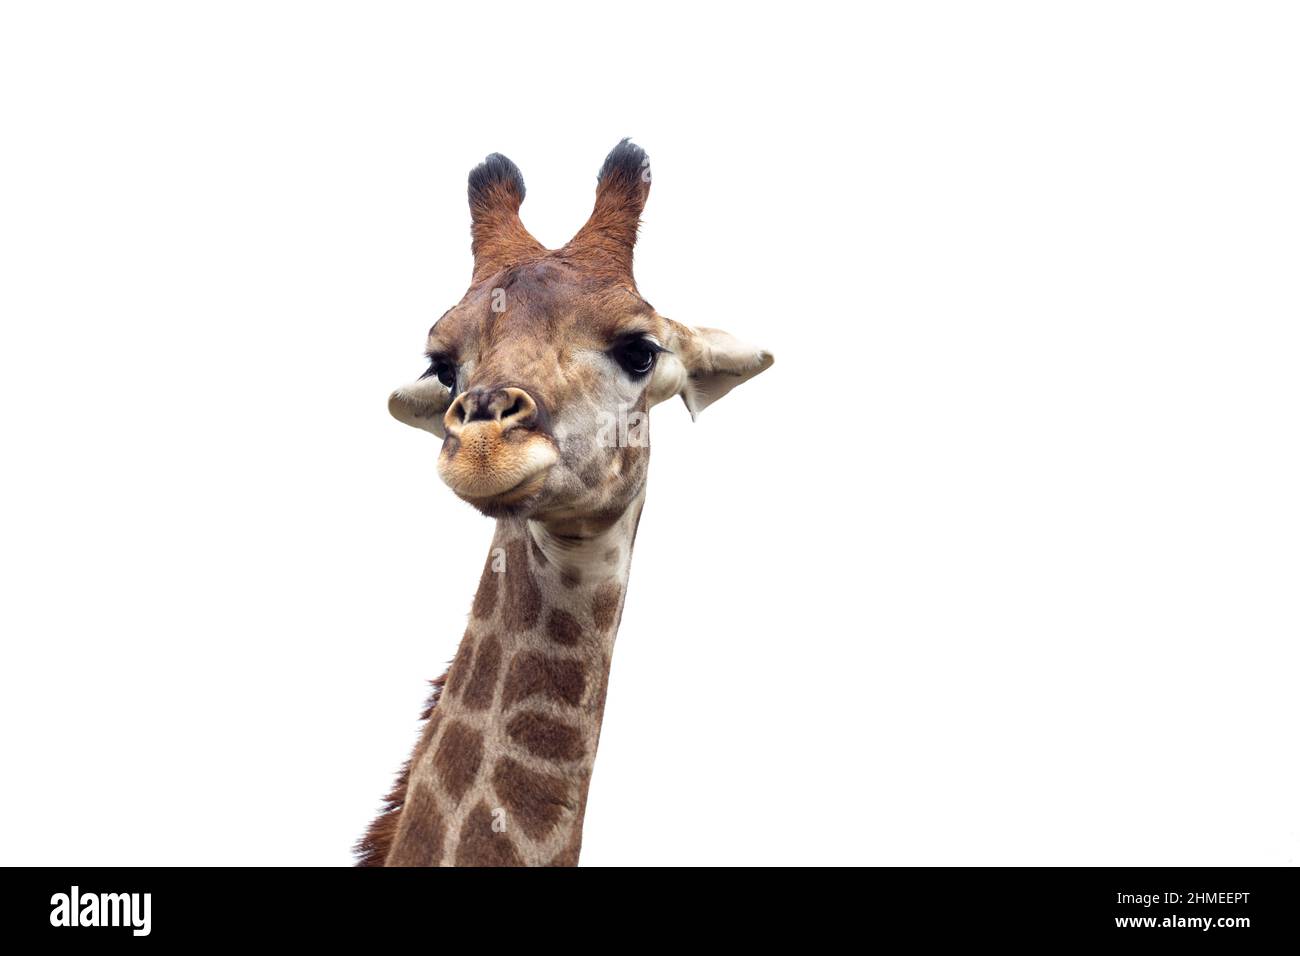 Closeup of a giraffe head with a cloudy background Stock Photo